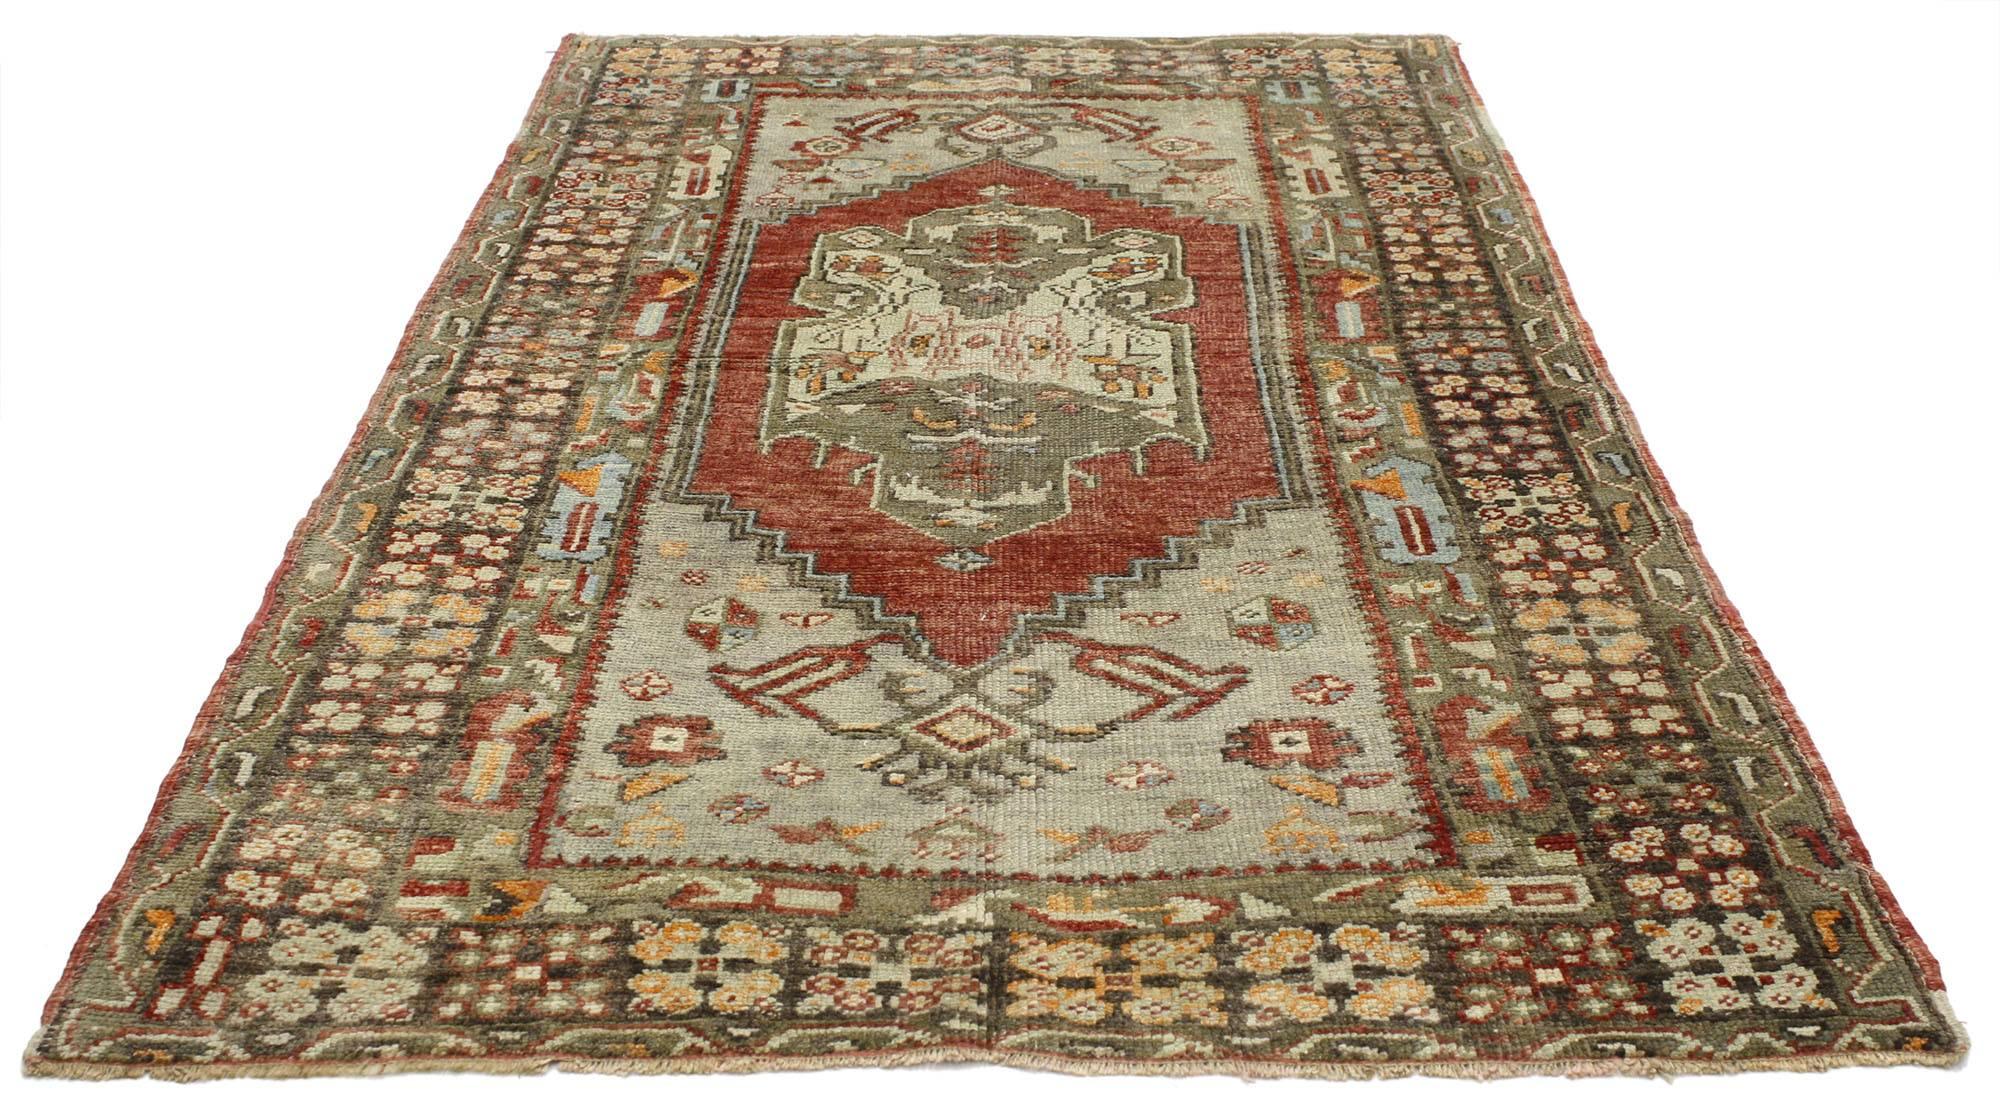 52257 Rustic style vintage Turkish Oushak accent rug, entry or foyer rug. Recalling the ancient symbolism of times gone by, the language of this vintage Turkish Oushak rug remains a mystery yet resonates strongly with design aesthetes today. This